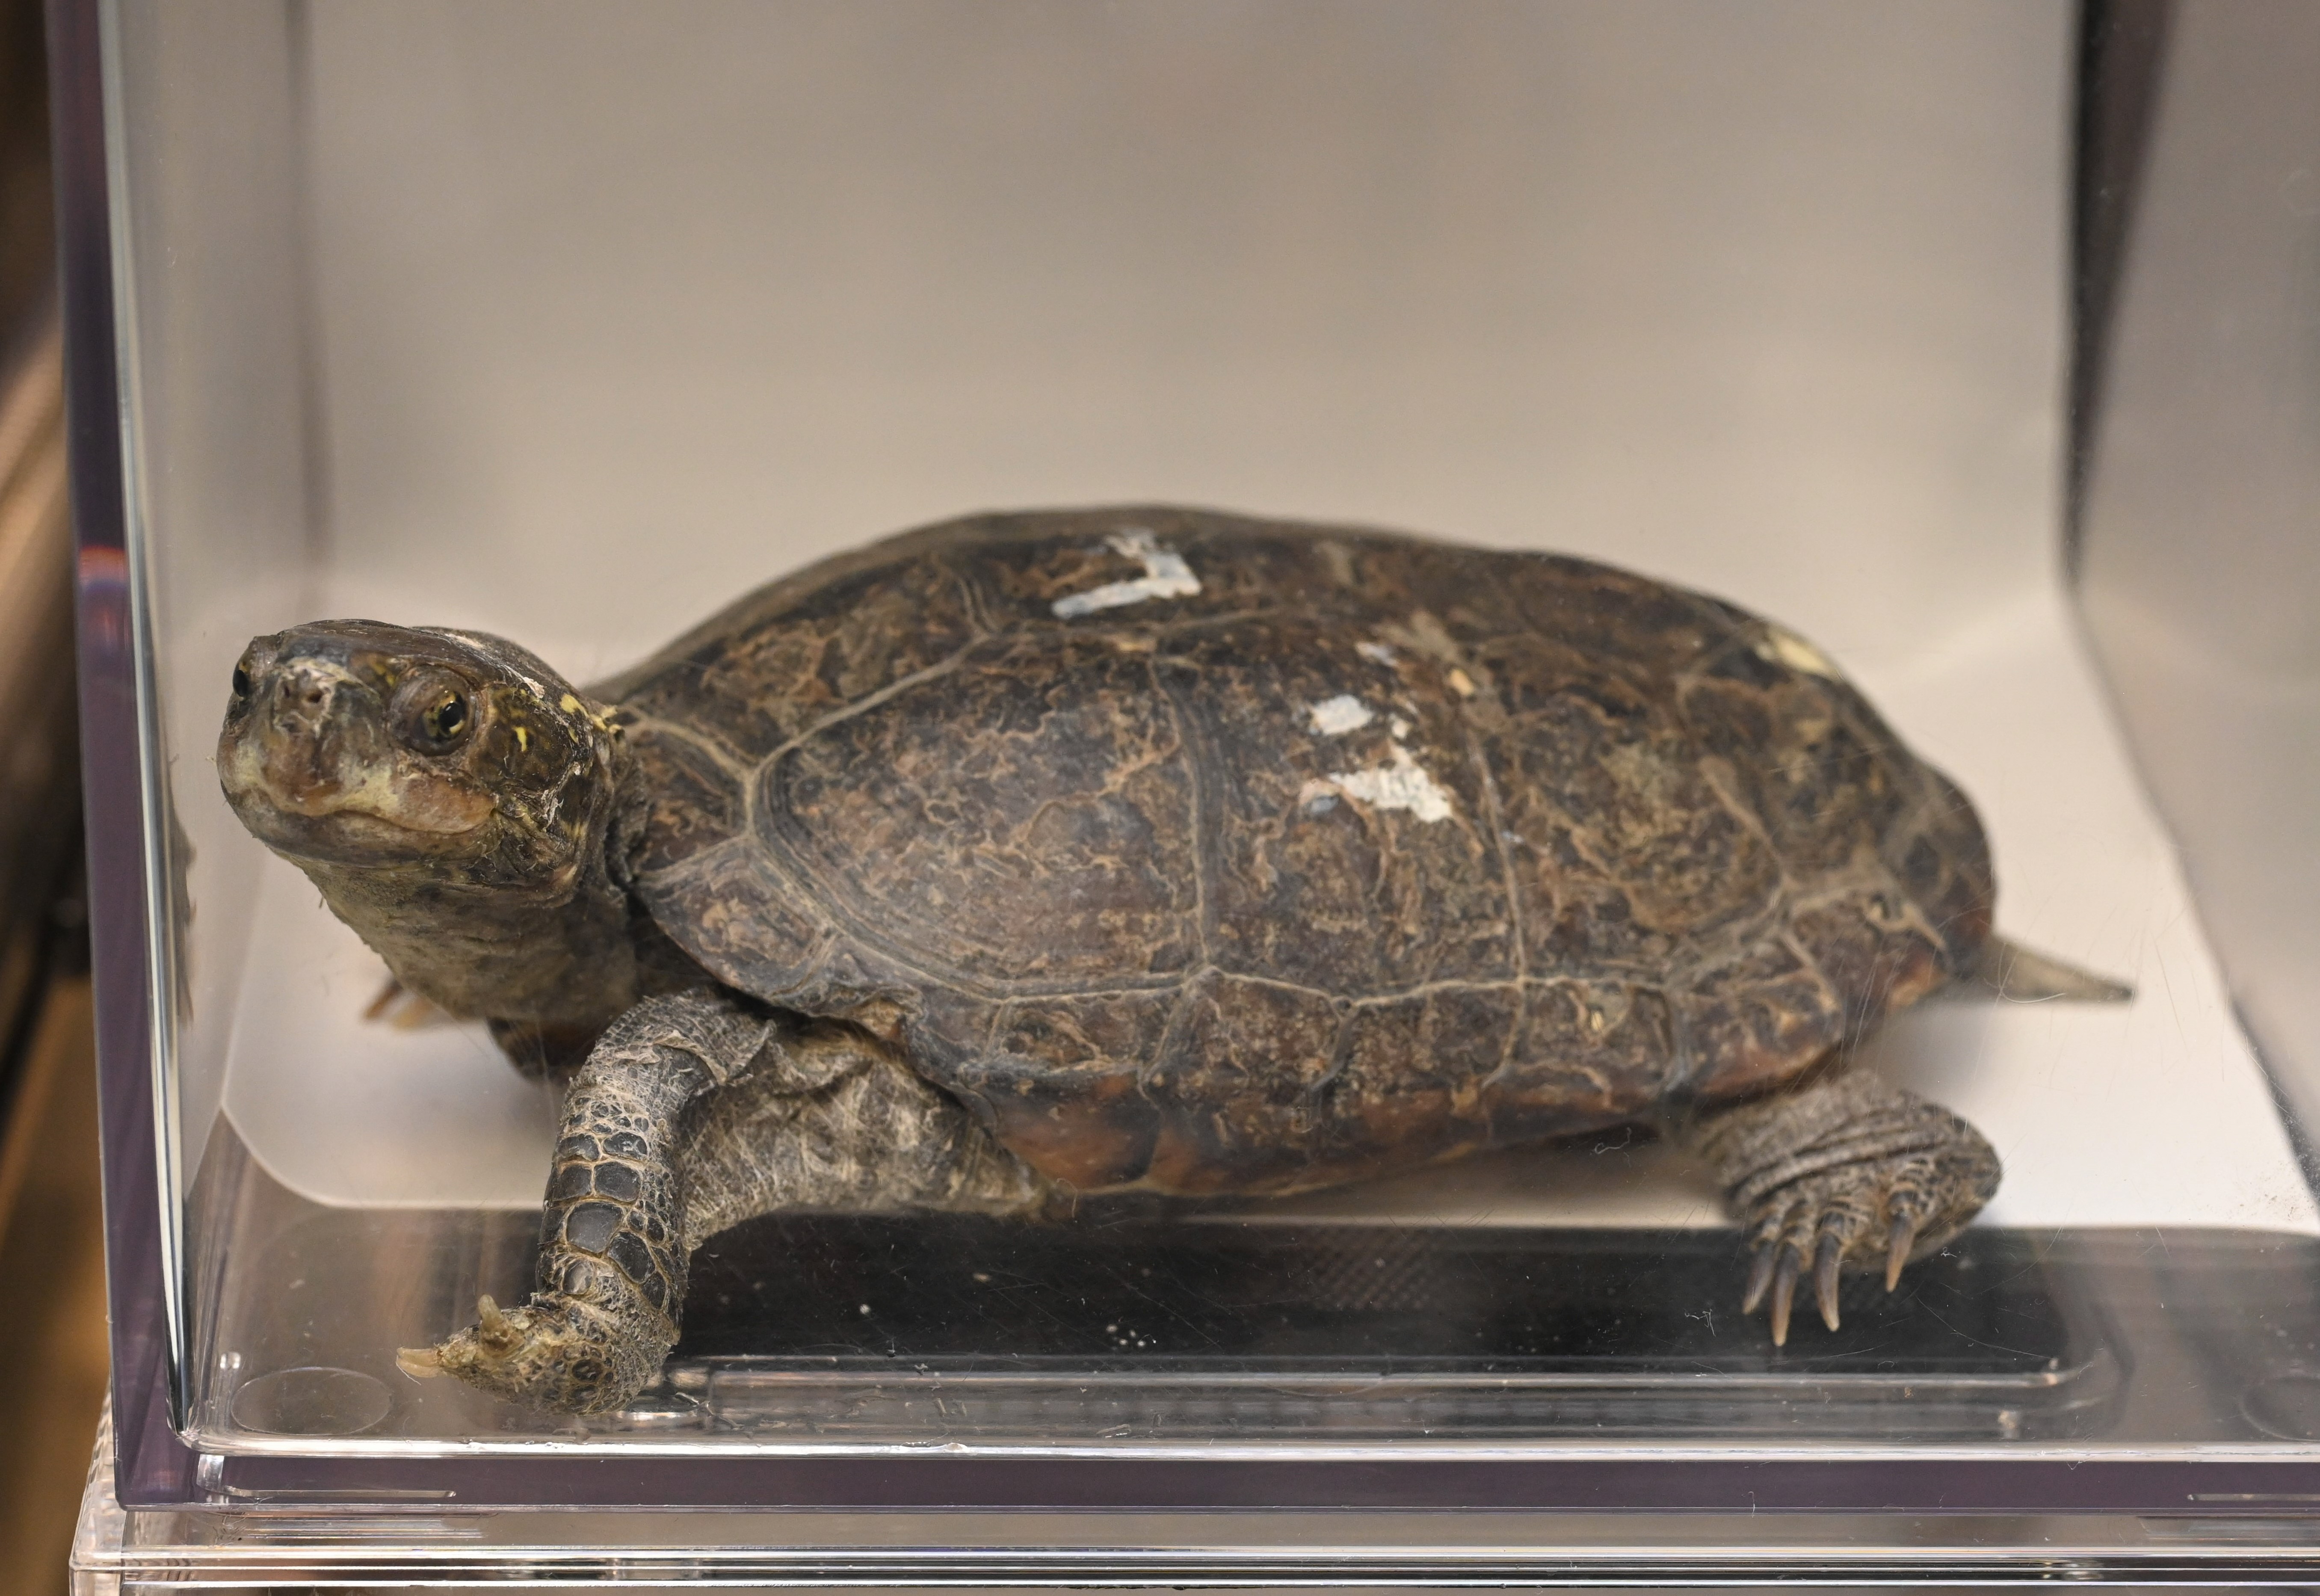 Twenty-nine specimens of endangered turtles seized in joint operation by AFCD and Police (6)